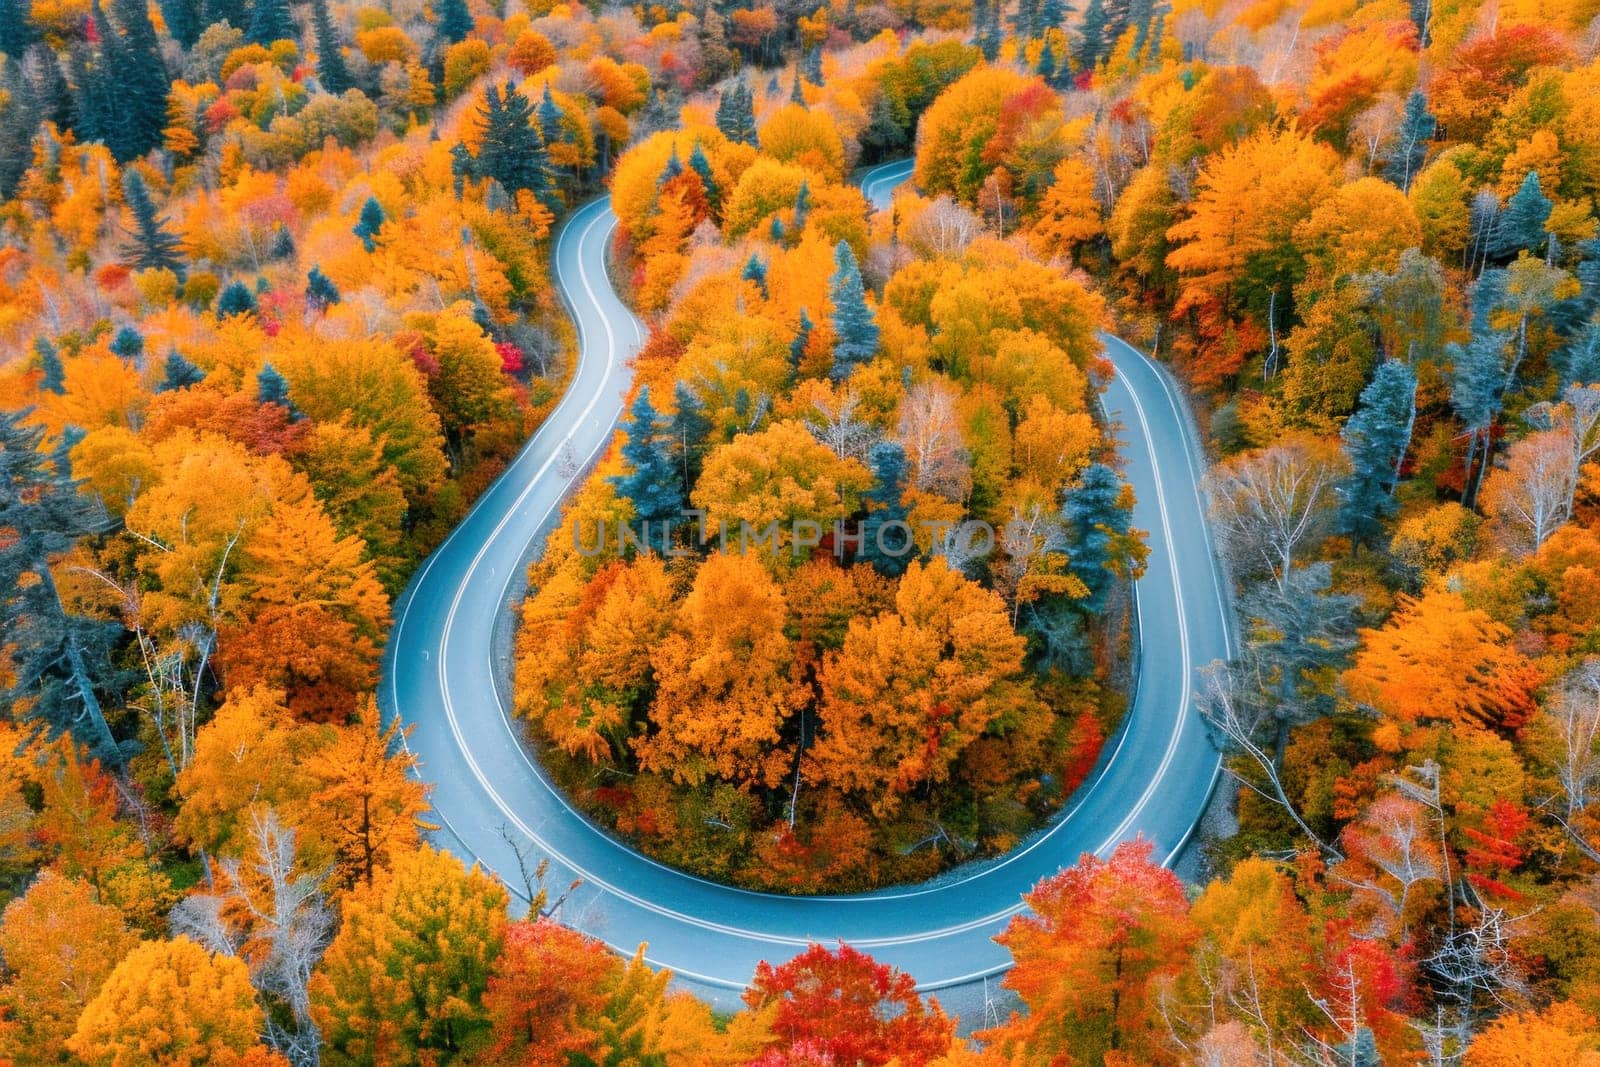 An aerial view captures a winding road through a dense forest, showcasing the natural beauty of the landscape